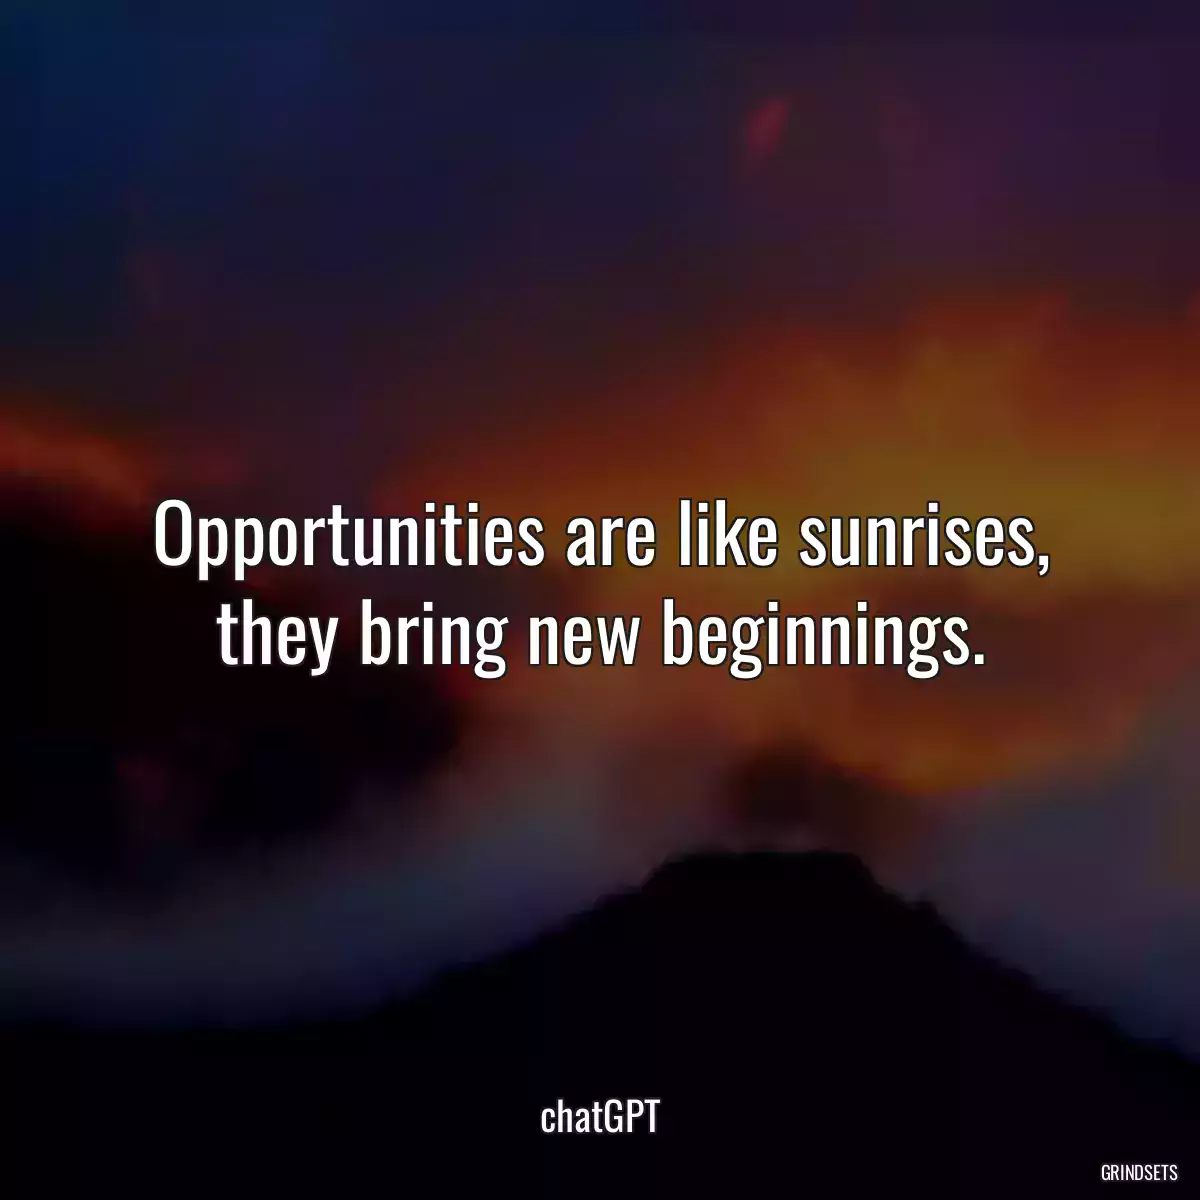 Opportunities are like sunrises, they bring new beginnings.